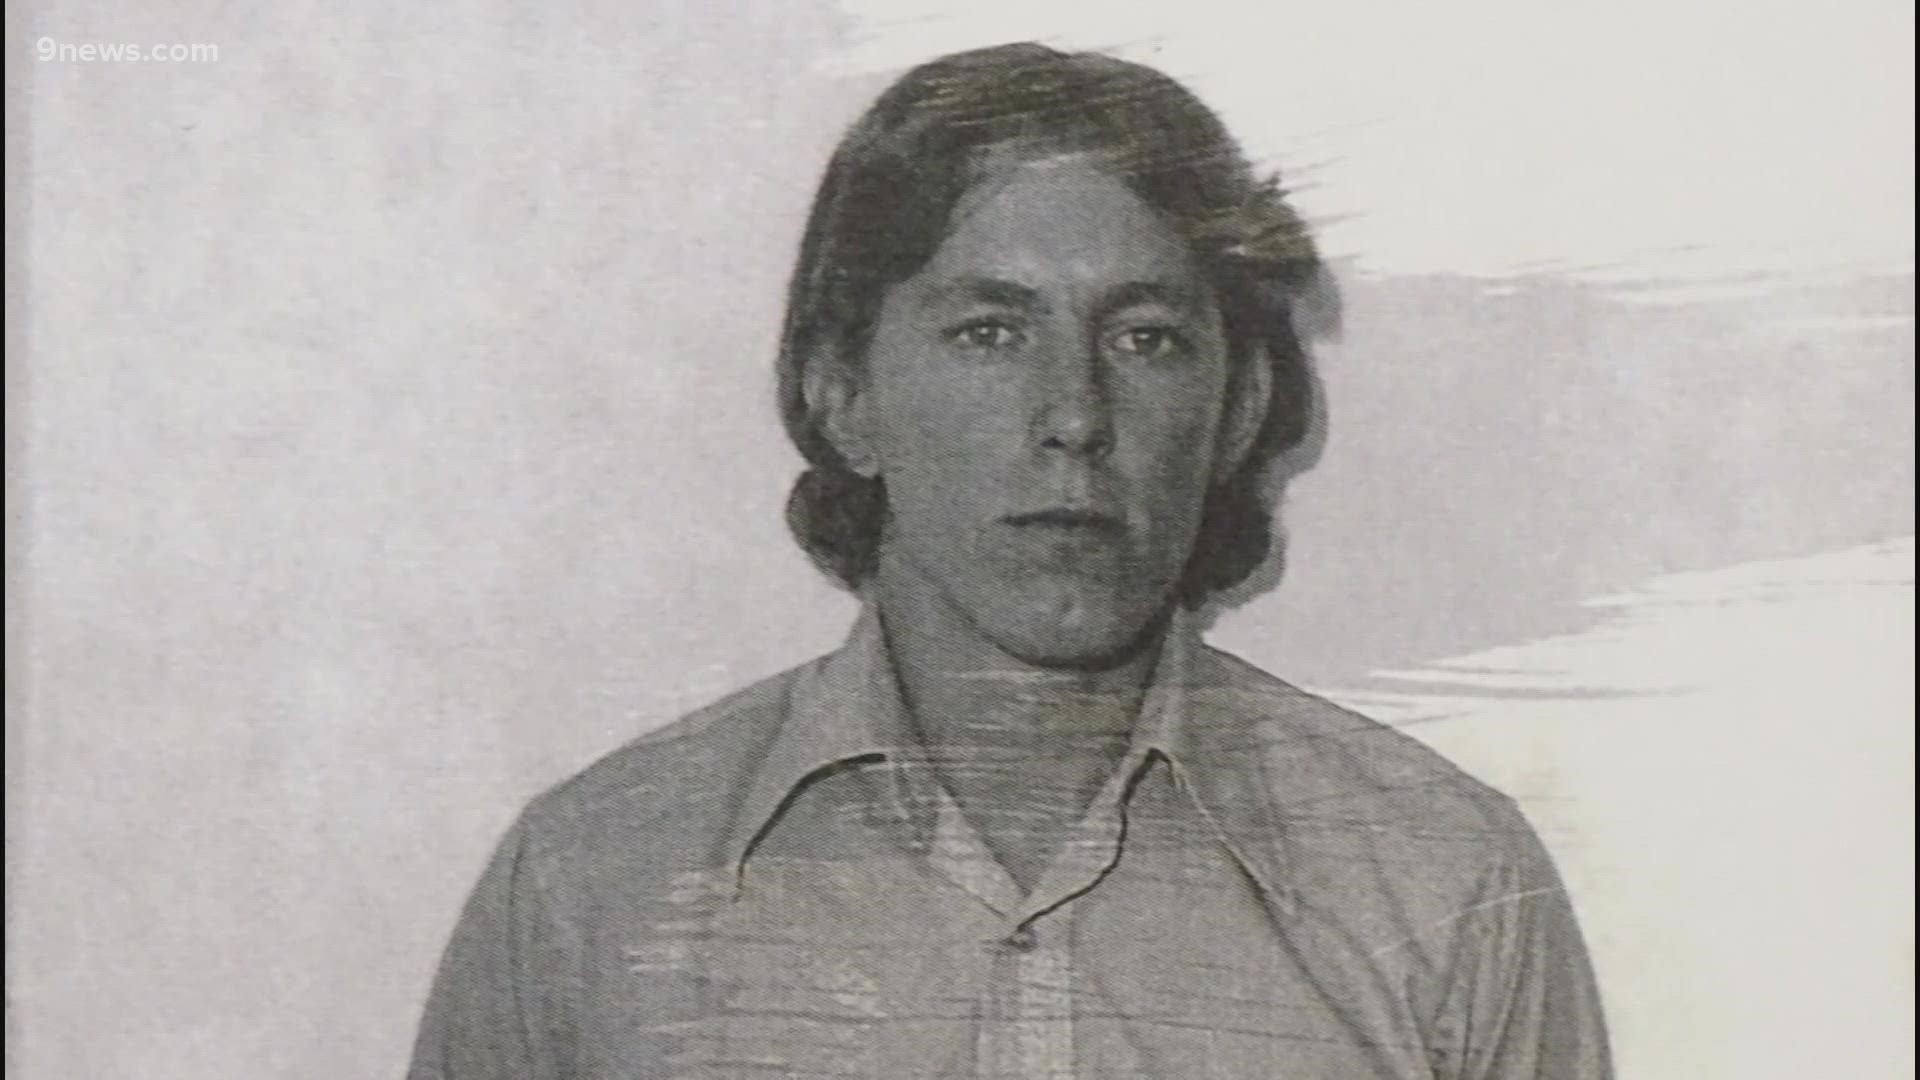 Alan Lee Phillips is accused in the 1982 murders of Annette Schnee, 21, and Barbara Oberholtzer, 29.